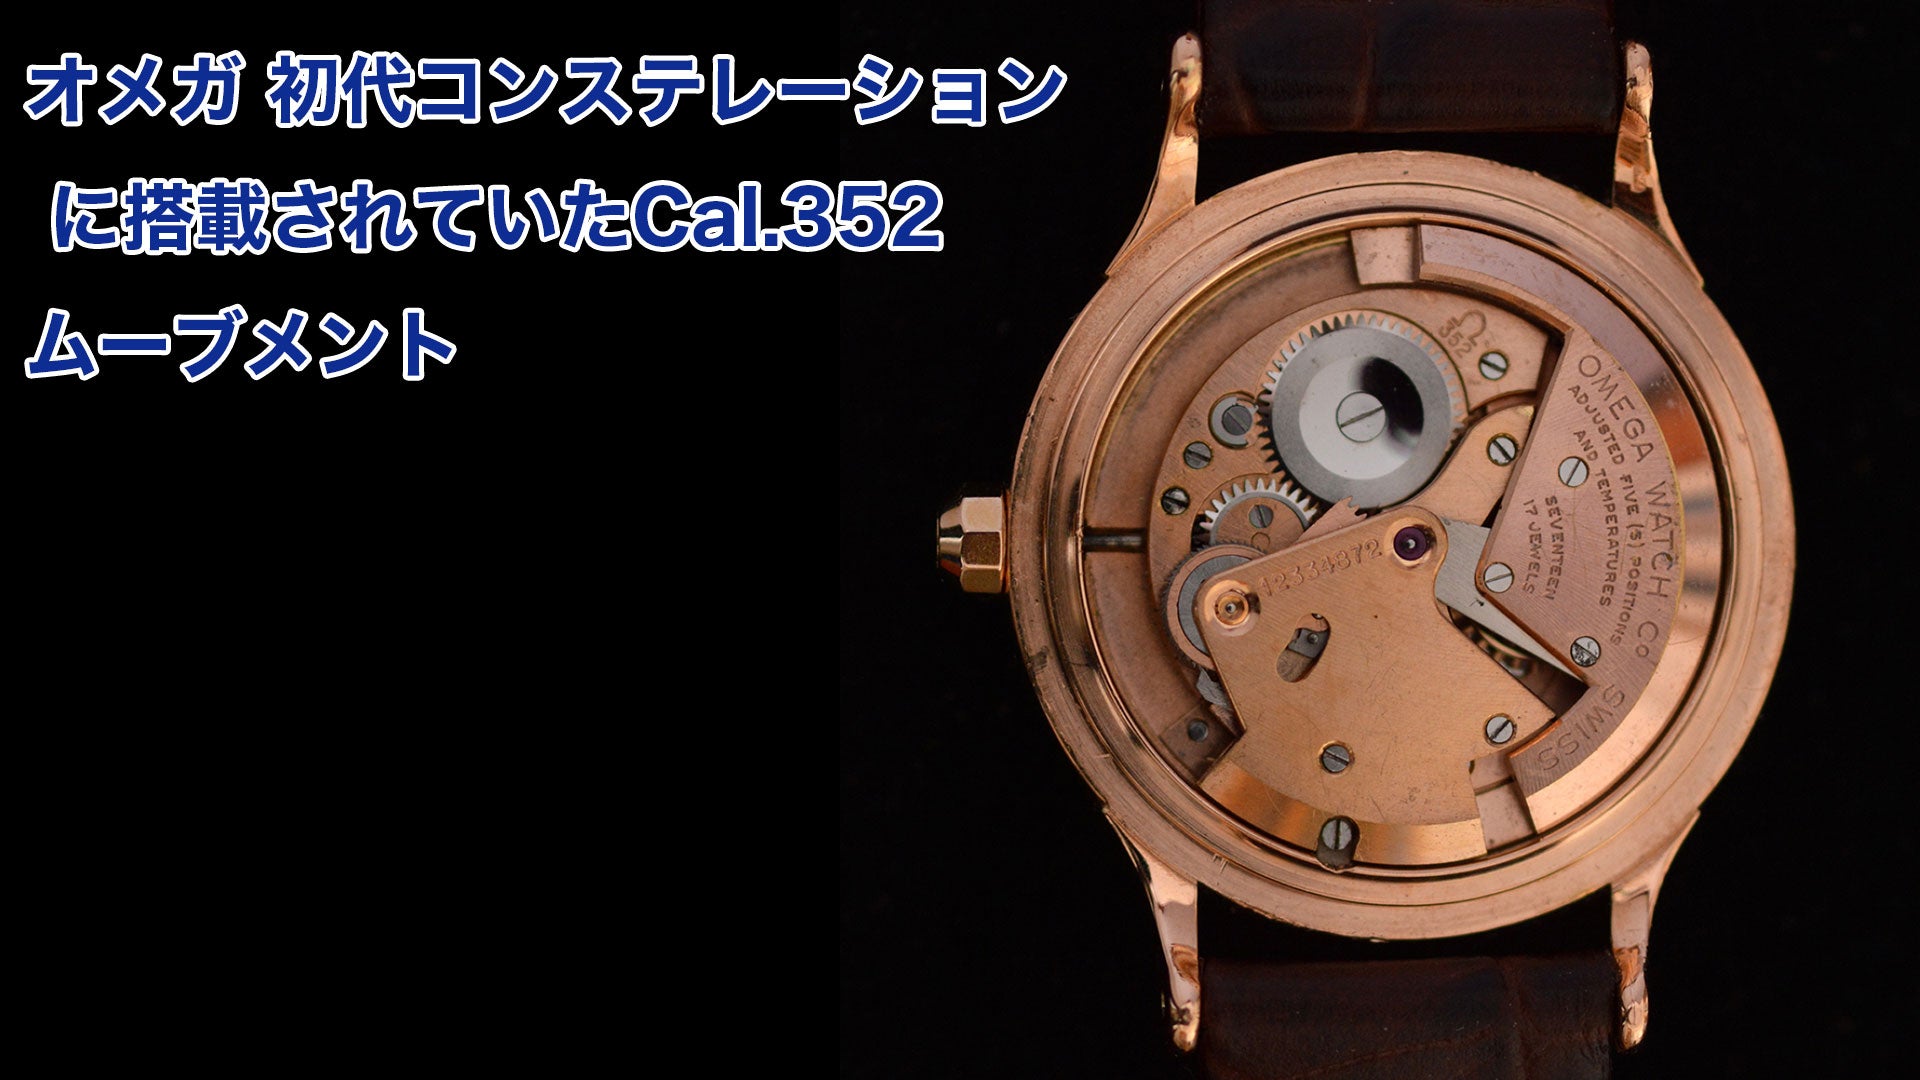 Cal.352 movement used in the first Omega Constellation